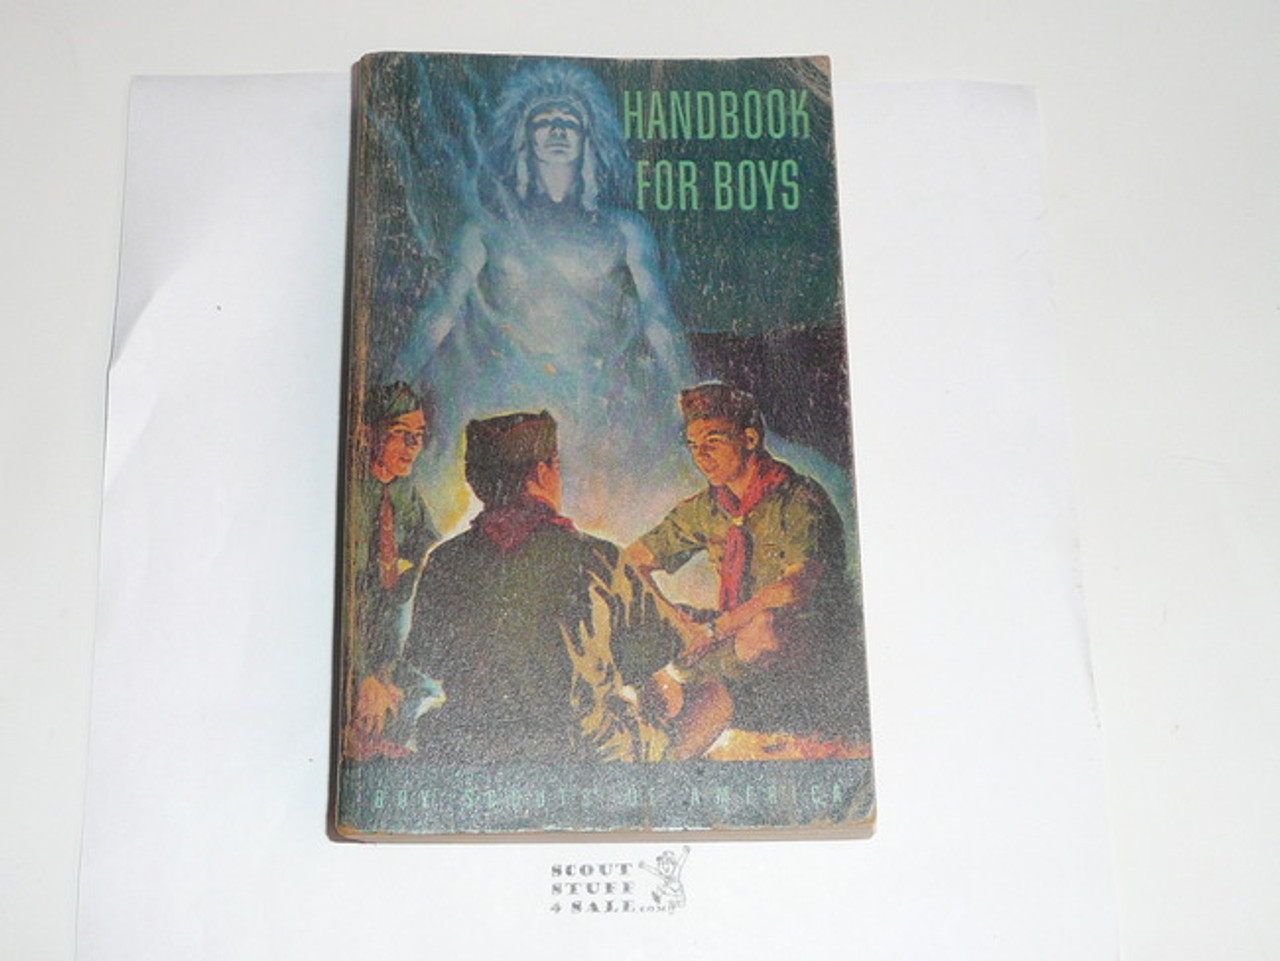 1955 Boy Scout Handbook, Fifth Edition, Eighth Printing, Used condition